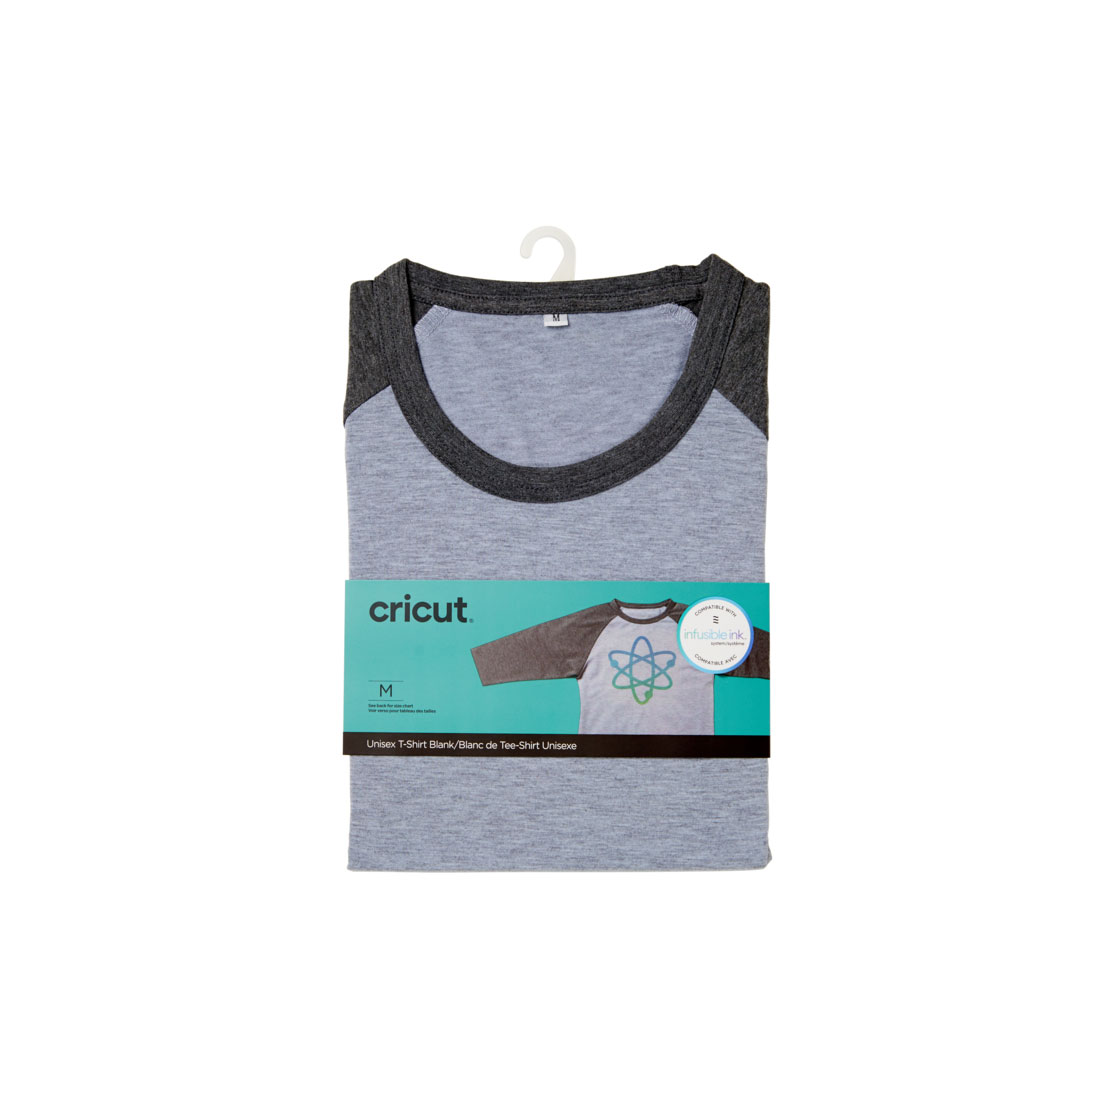 Cricut: How to Create an Infusible Ink T-shirt | Hobbycraft UK